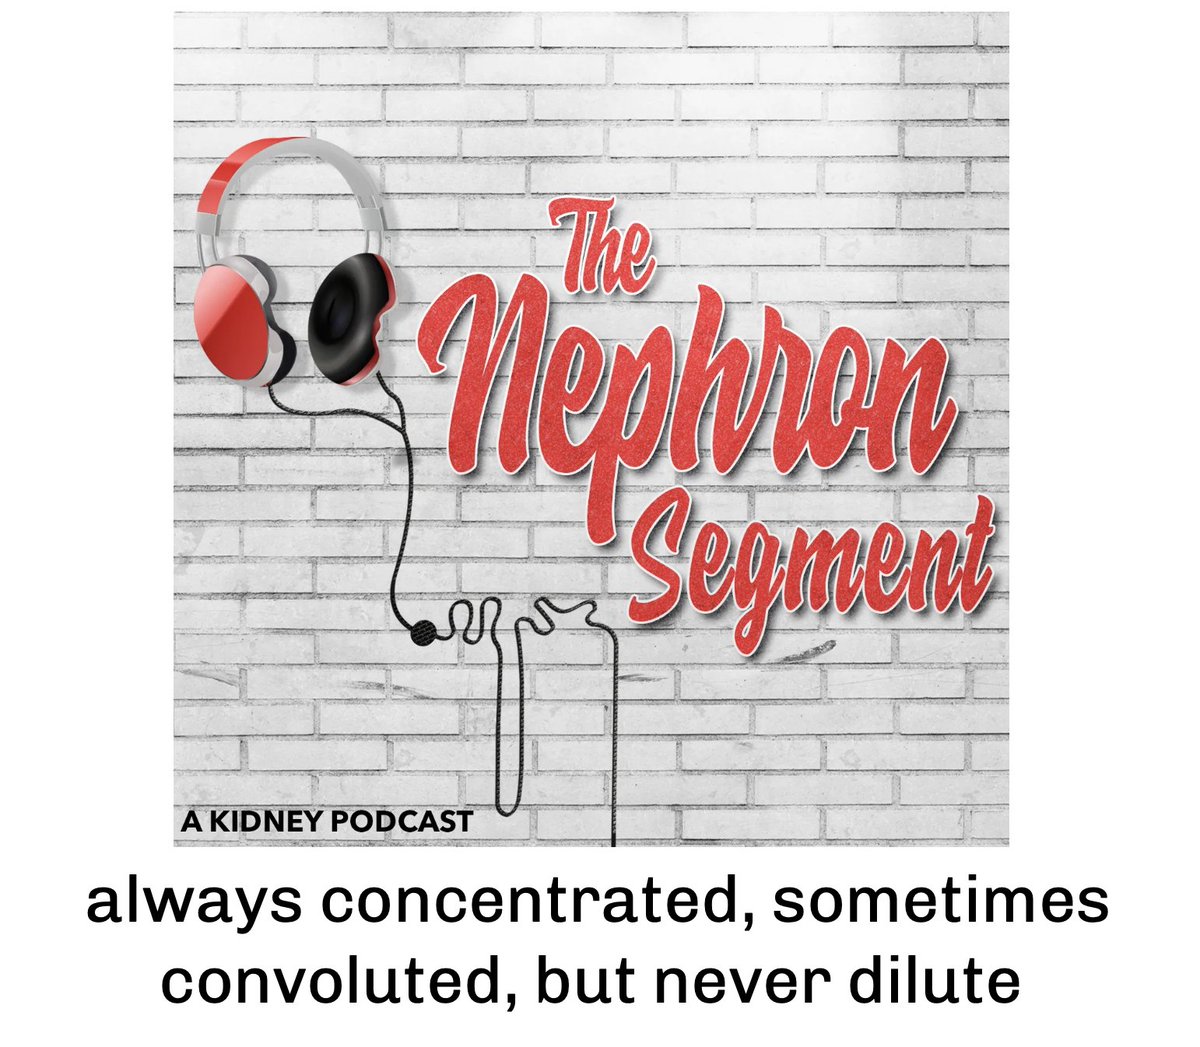 Episode 🔟 of The Nephron Segment coming soon All 9 episodes available here: nephsim.com/the-nephron-se… 'Always concentrated, sometimes convoluted, but never dilute' #Nephrology #NKFClinicals #Podcast @ssfarouk @Nephro_Sparks @ElinorMannon @kantsmd